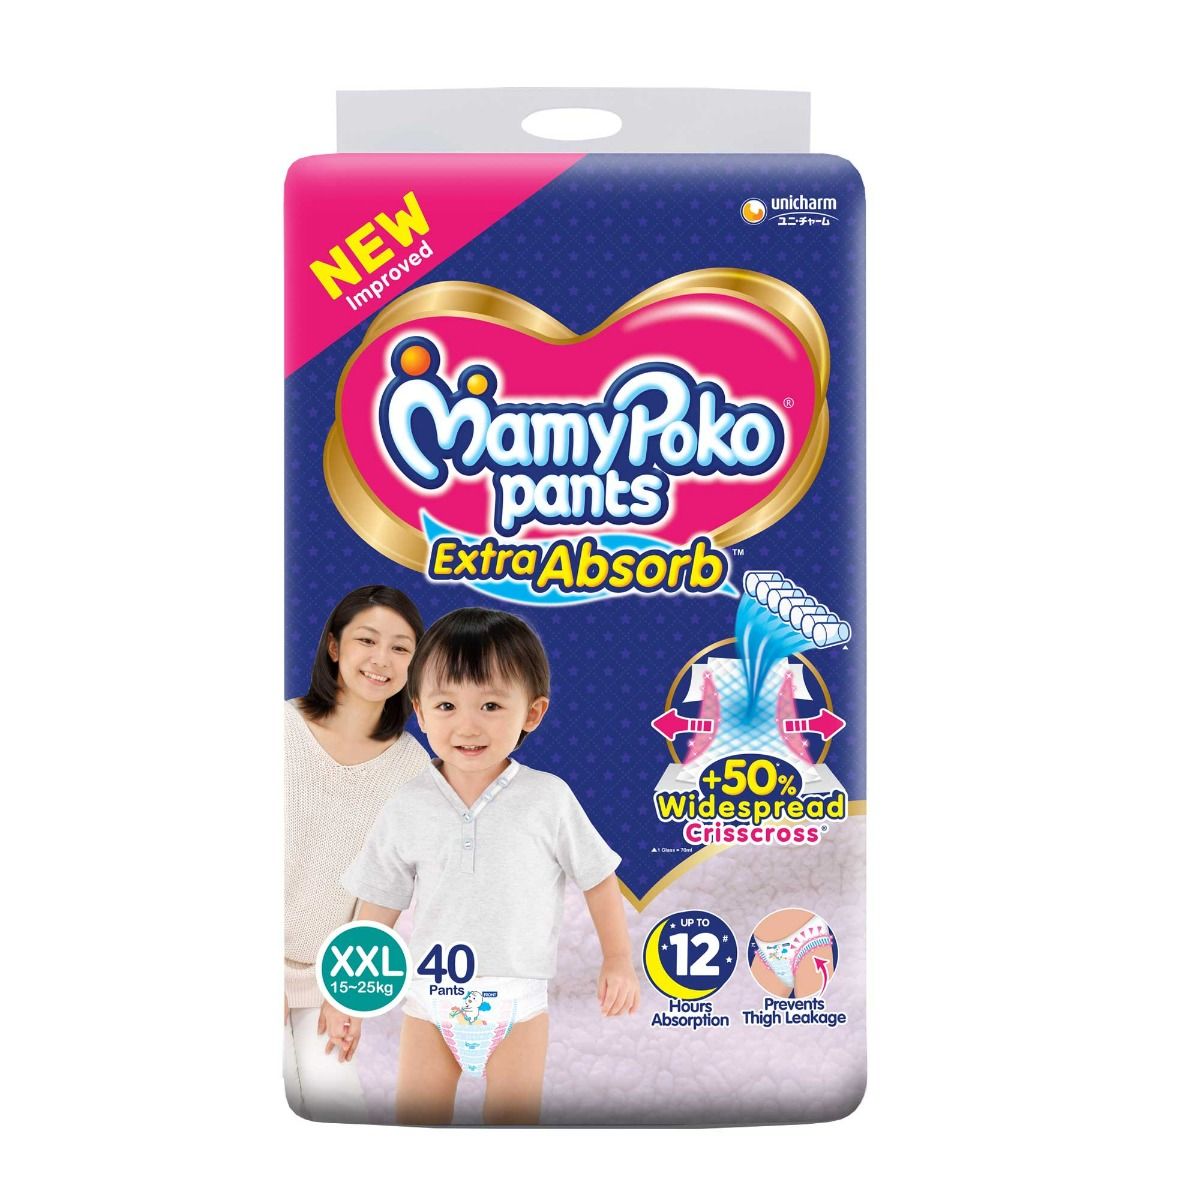 MamyPoko Pants Extra Absorb XXL, 40 Count, Pack of 1 